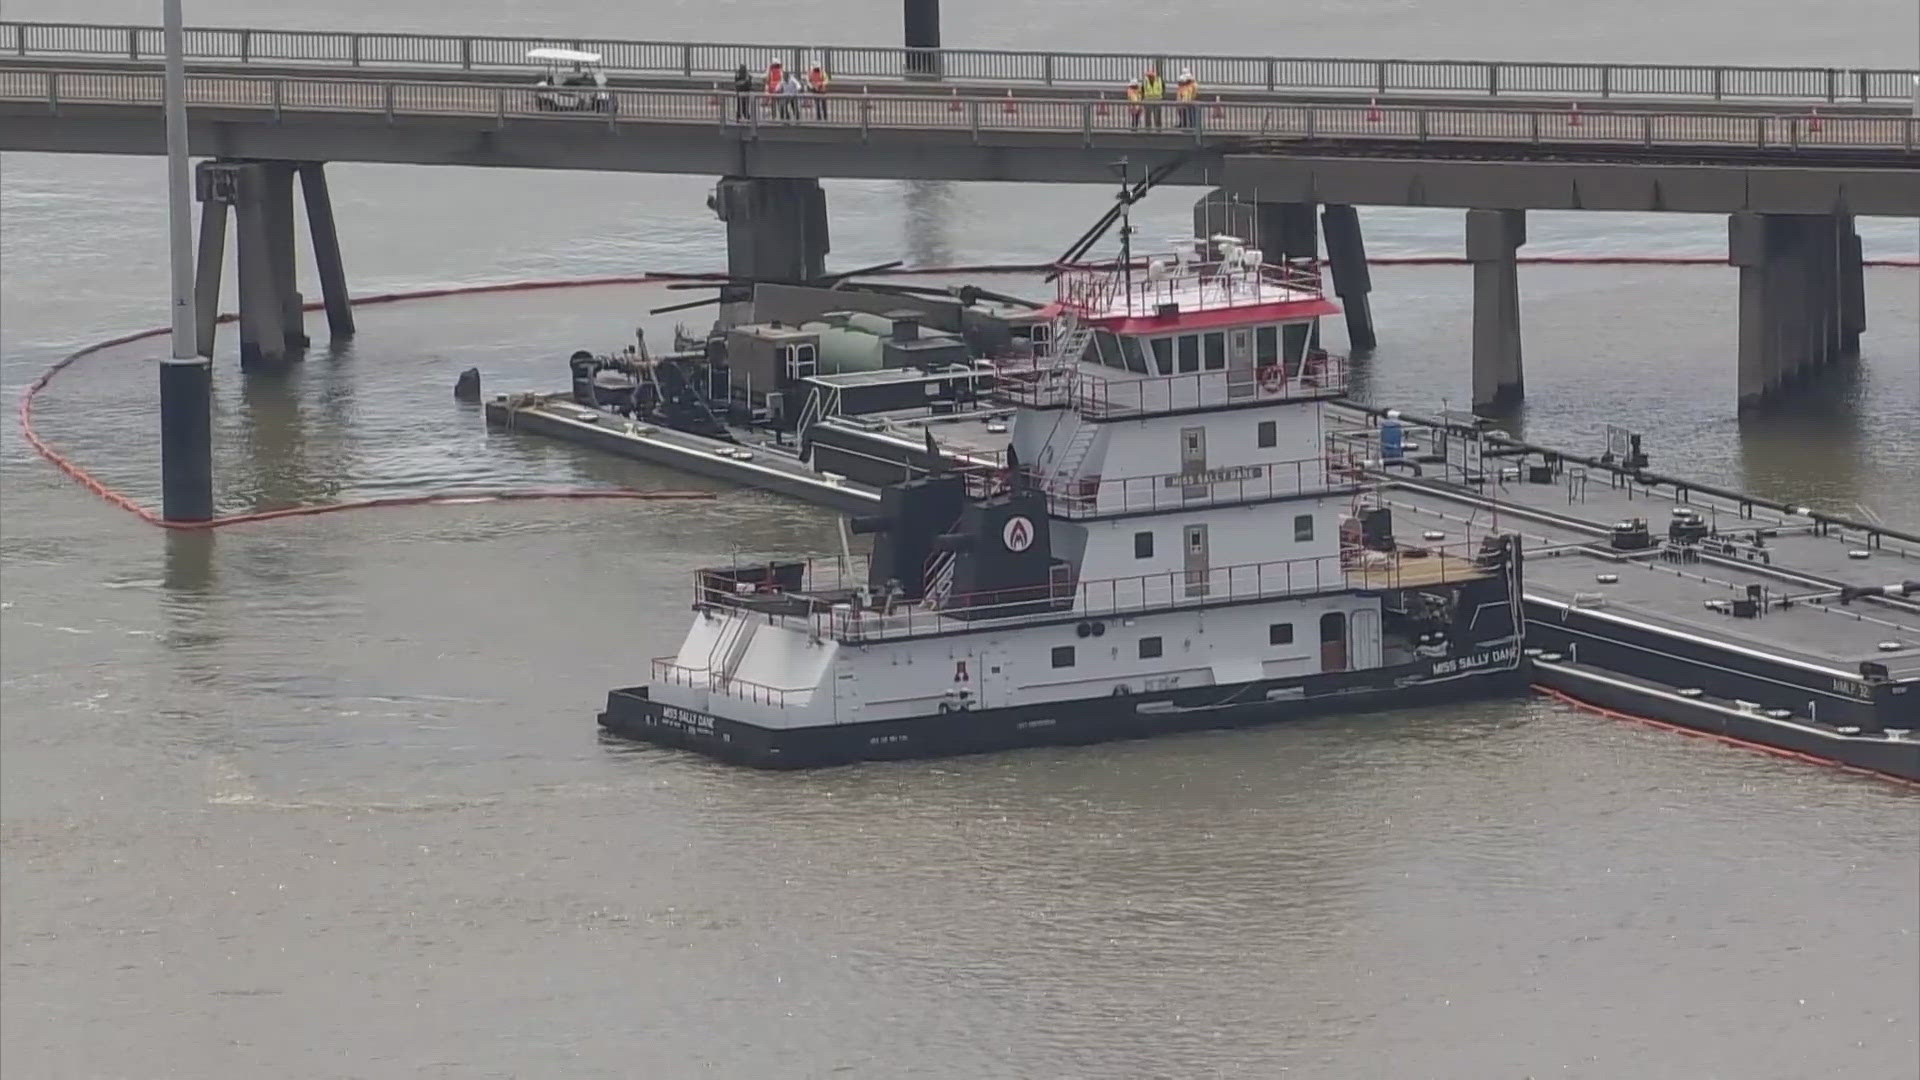 A barge hit the Pelican Island Causeway Bridge leading to a closure in both directions Wednesday morning, according to officials.